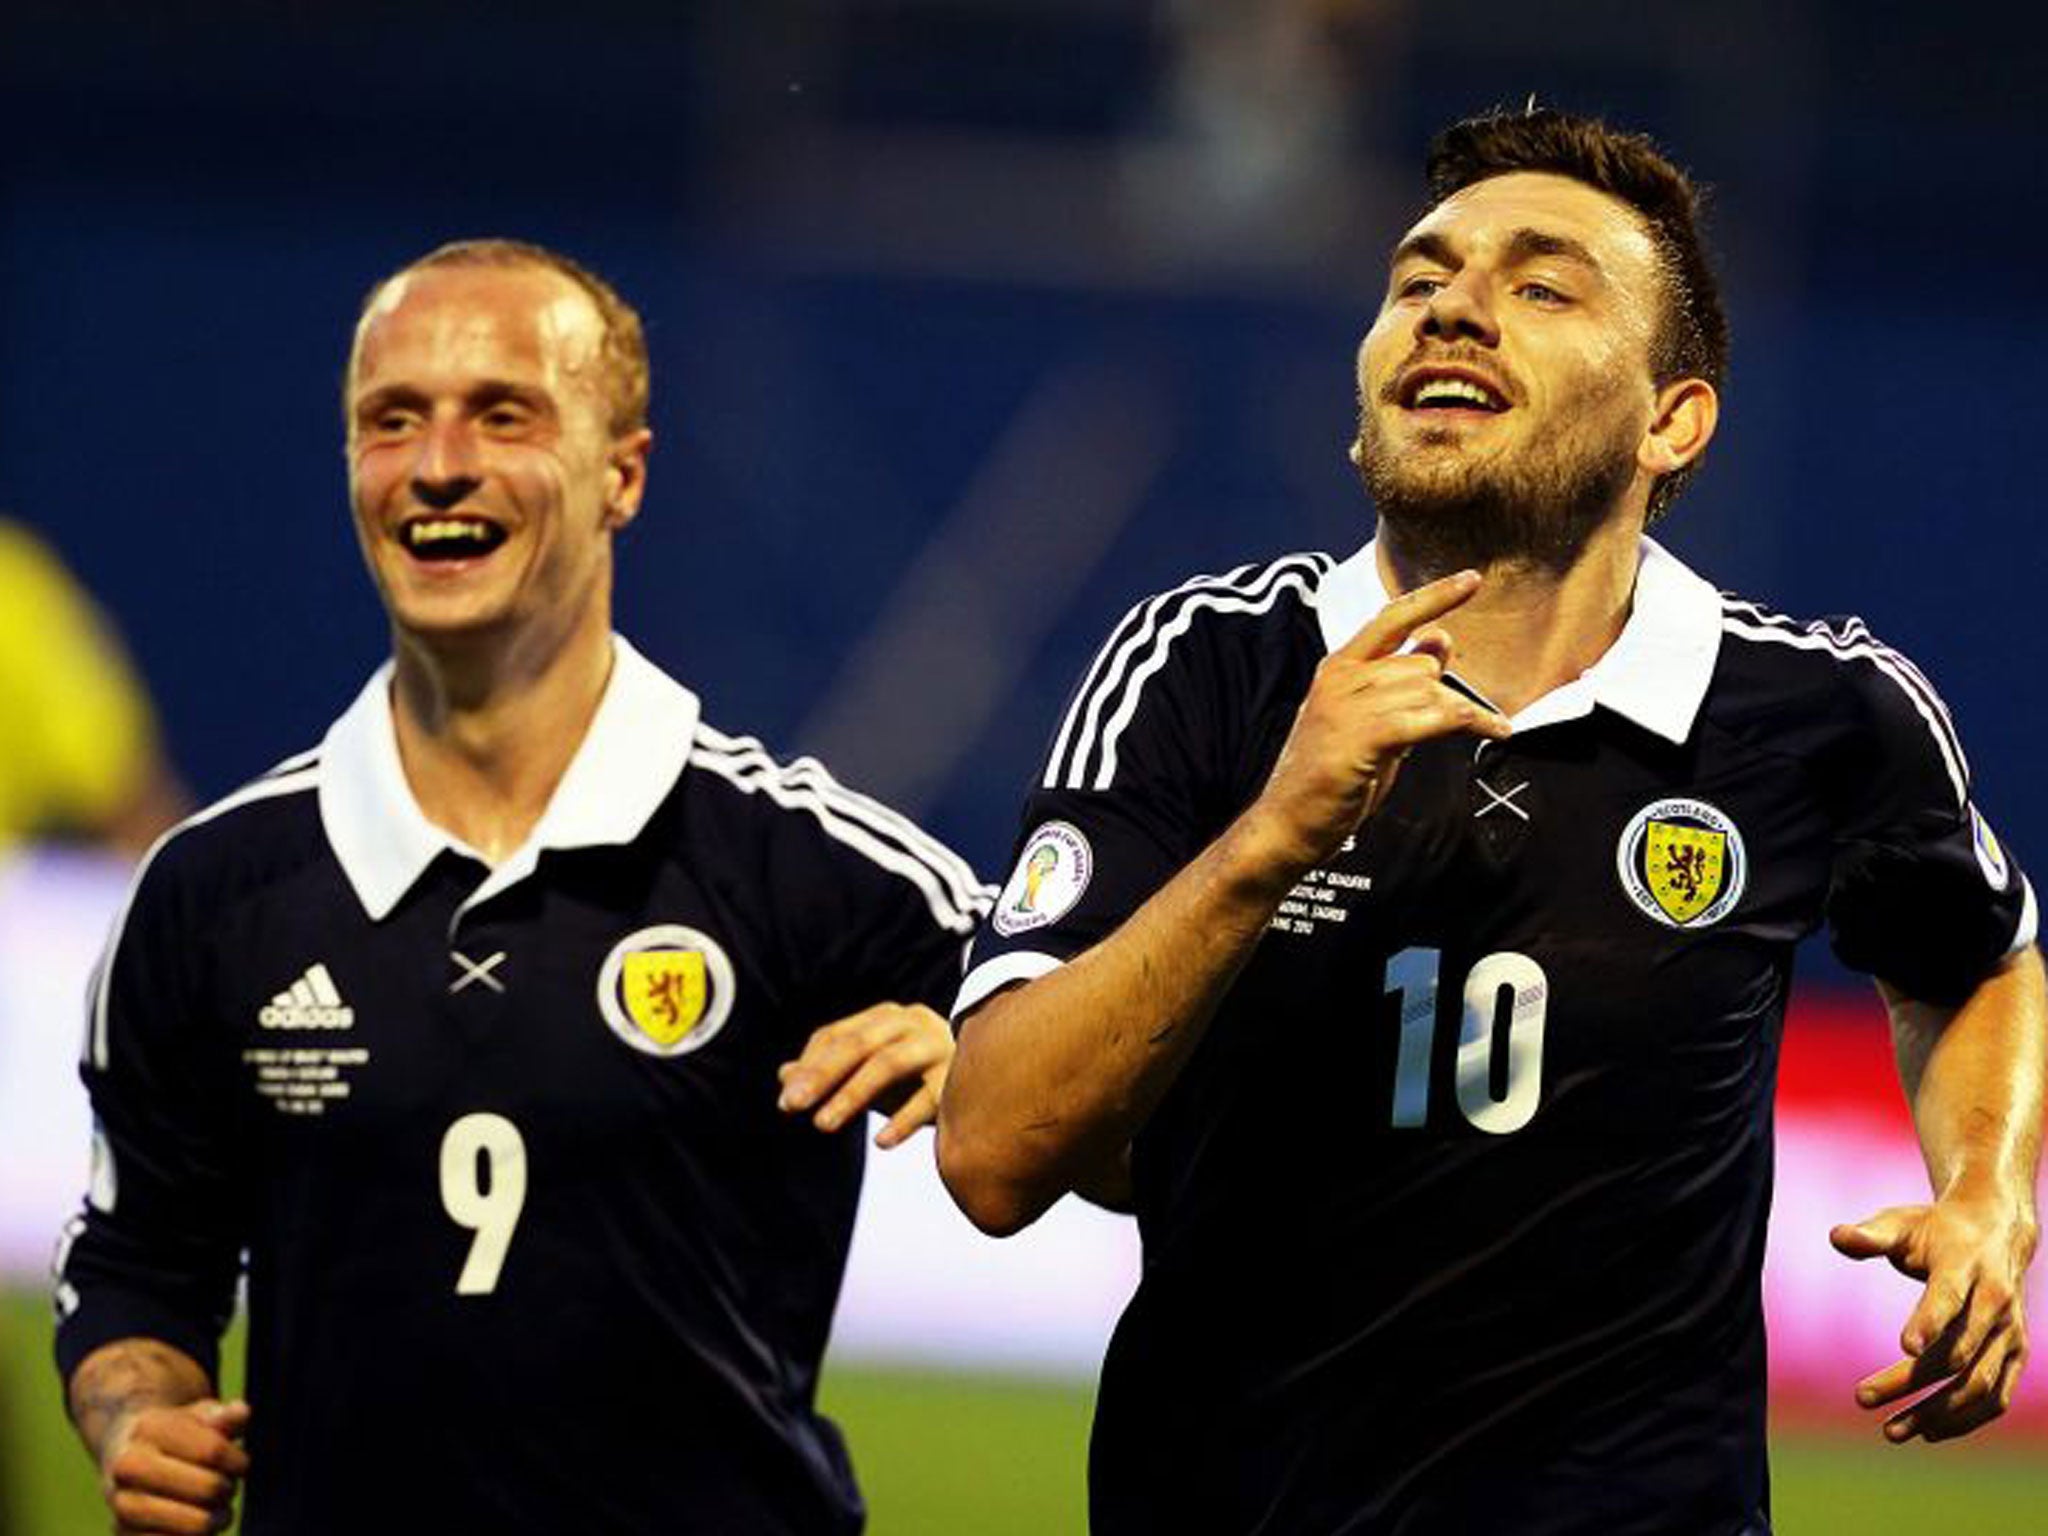 Scotland's Robert Snodgrass celebrates with his teammate Leigh Griffiths after scoring